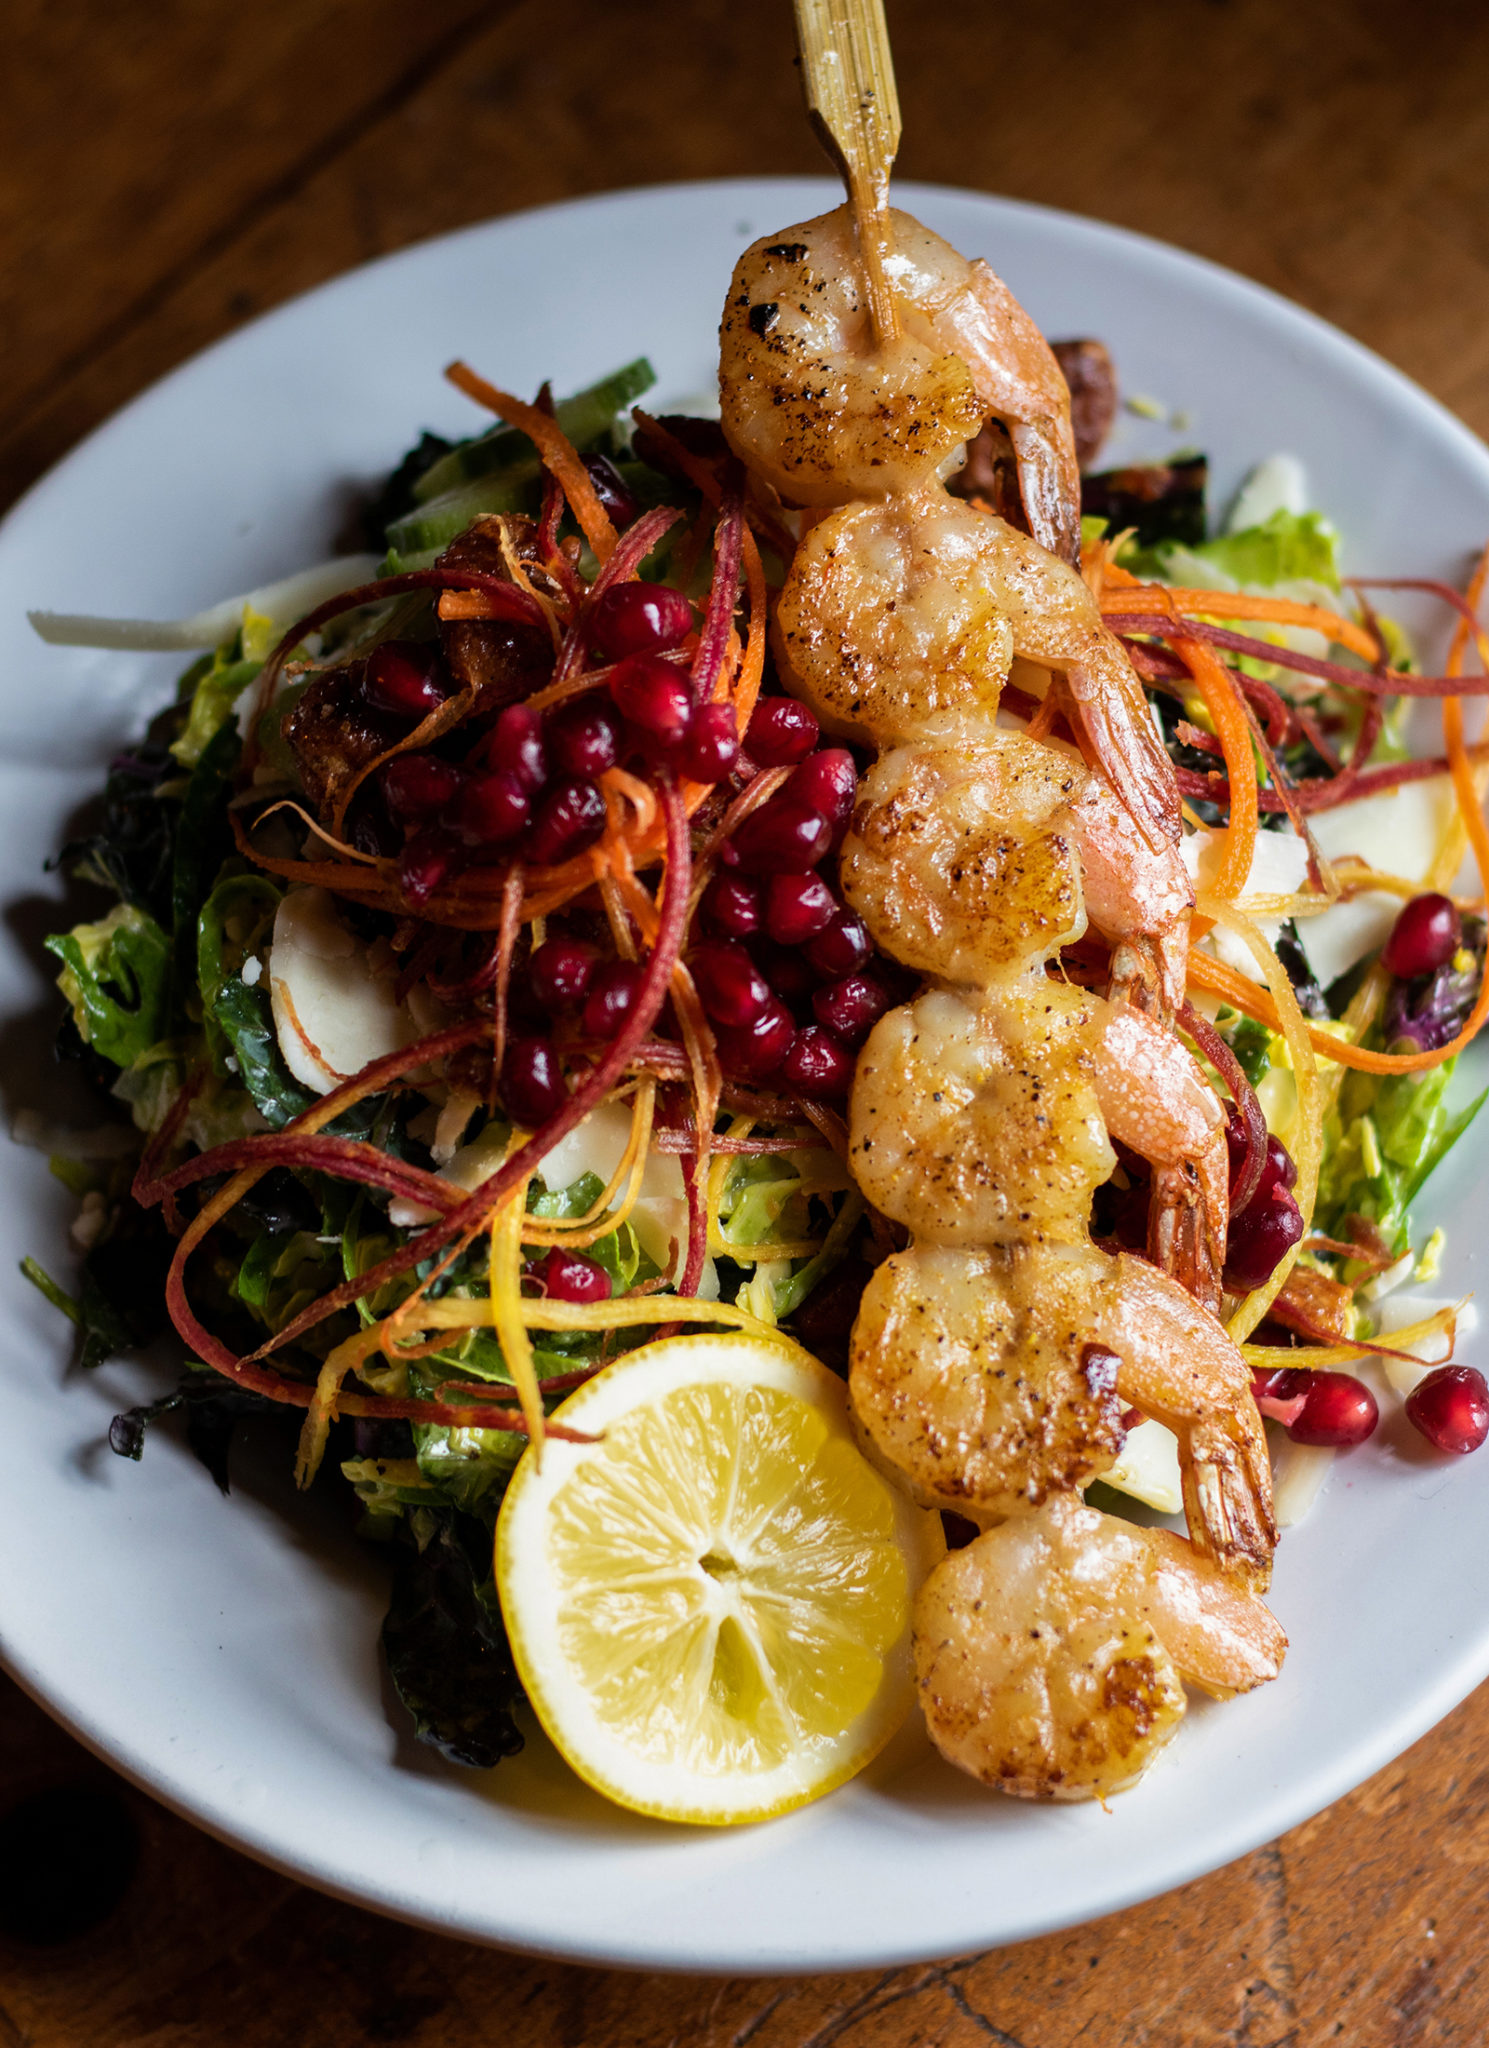 Salad with shrimp at The Holly and Tali Show at The Casino Bar and Grill in Bodega. (Heather Irwin / Sonoma Magazine)